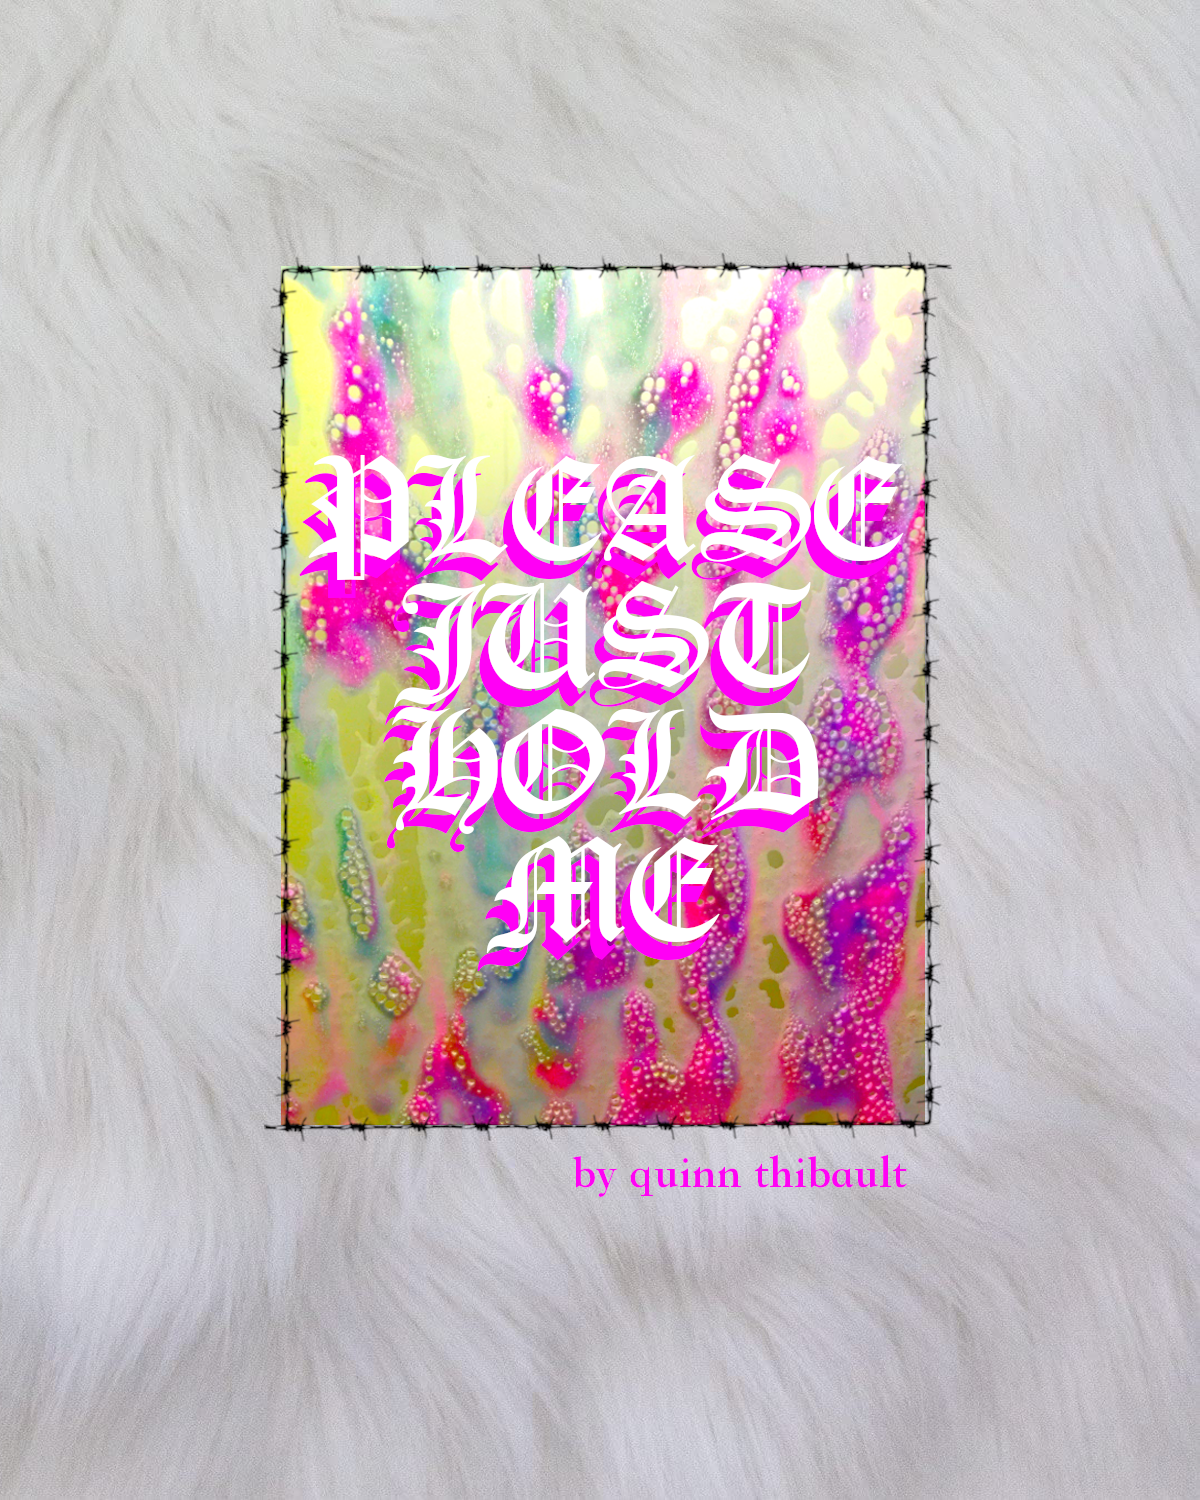 Please Just Hold Me is a chaotic, trauma-heavy zine riddled with text and oversaturated imagery. It tackles subjects such as emotional and verbal abuse, mental illness, addiction and detailed sexual encounters. 